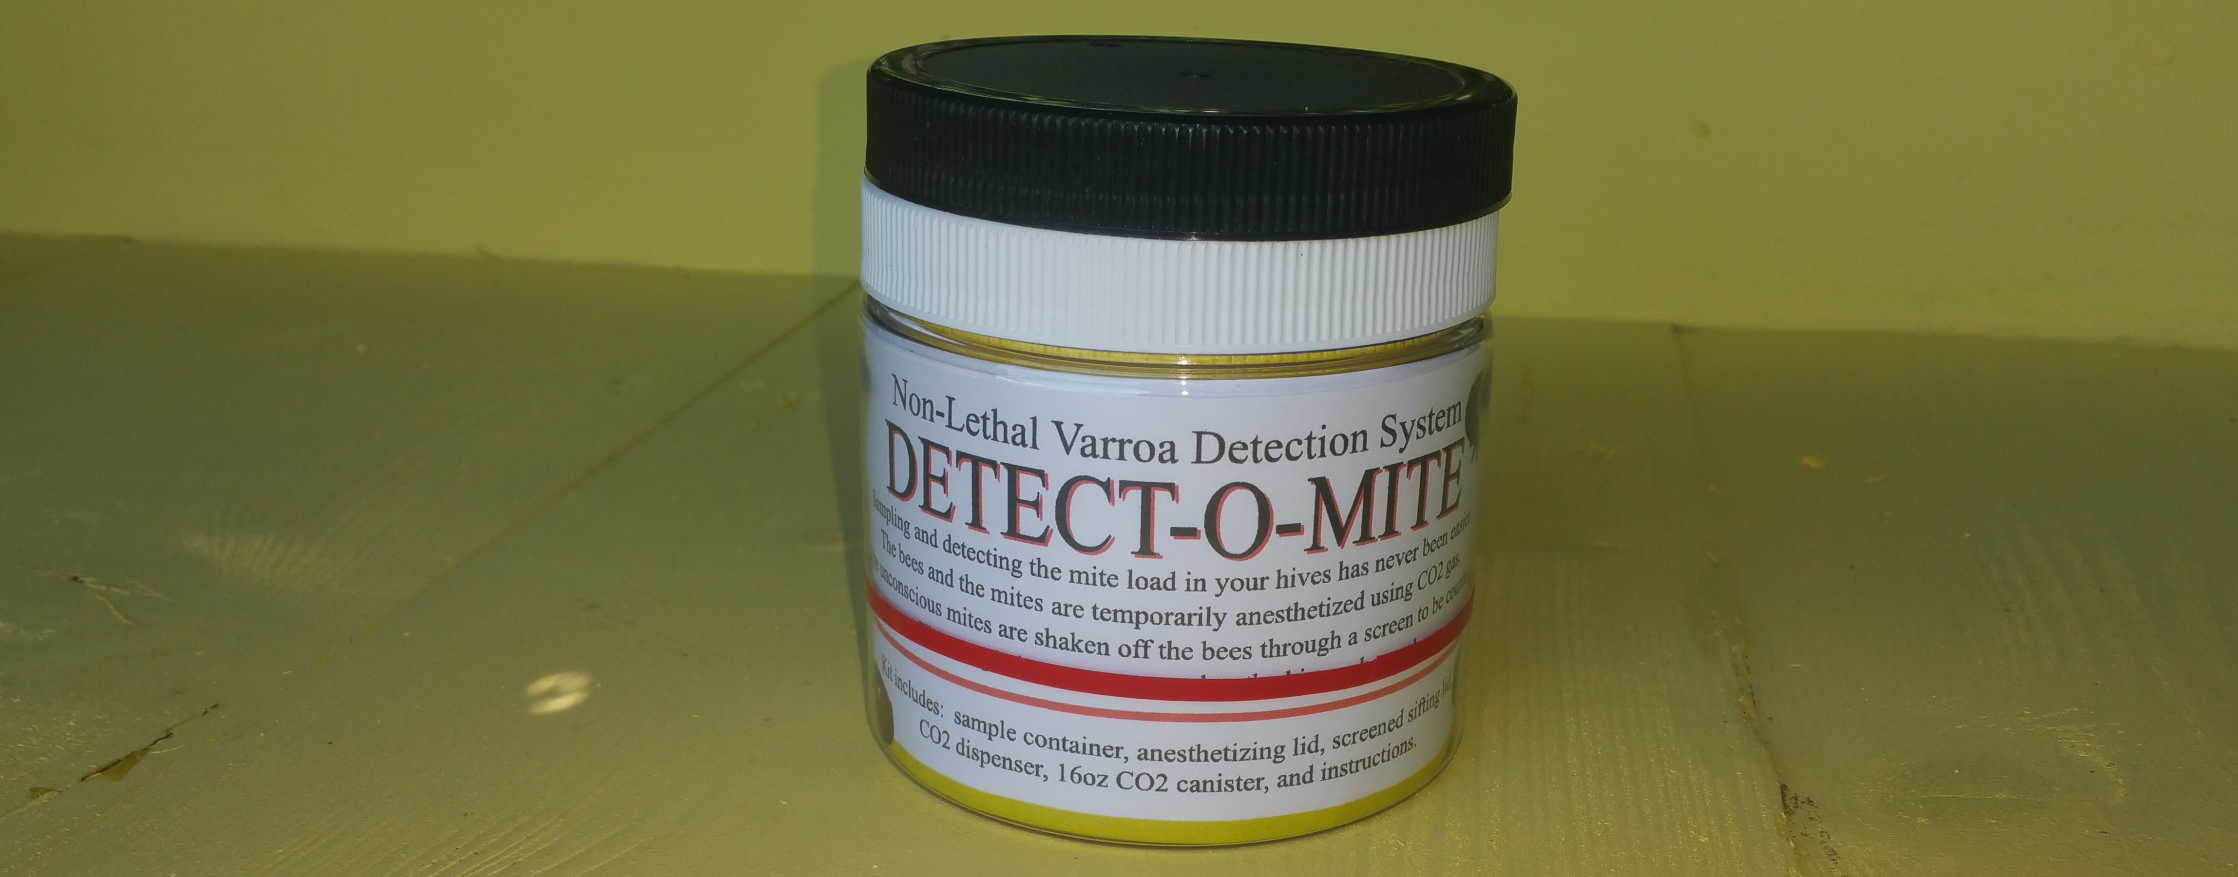 Detect-O-Mite: non lethal Varroa detection from beekeepers